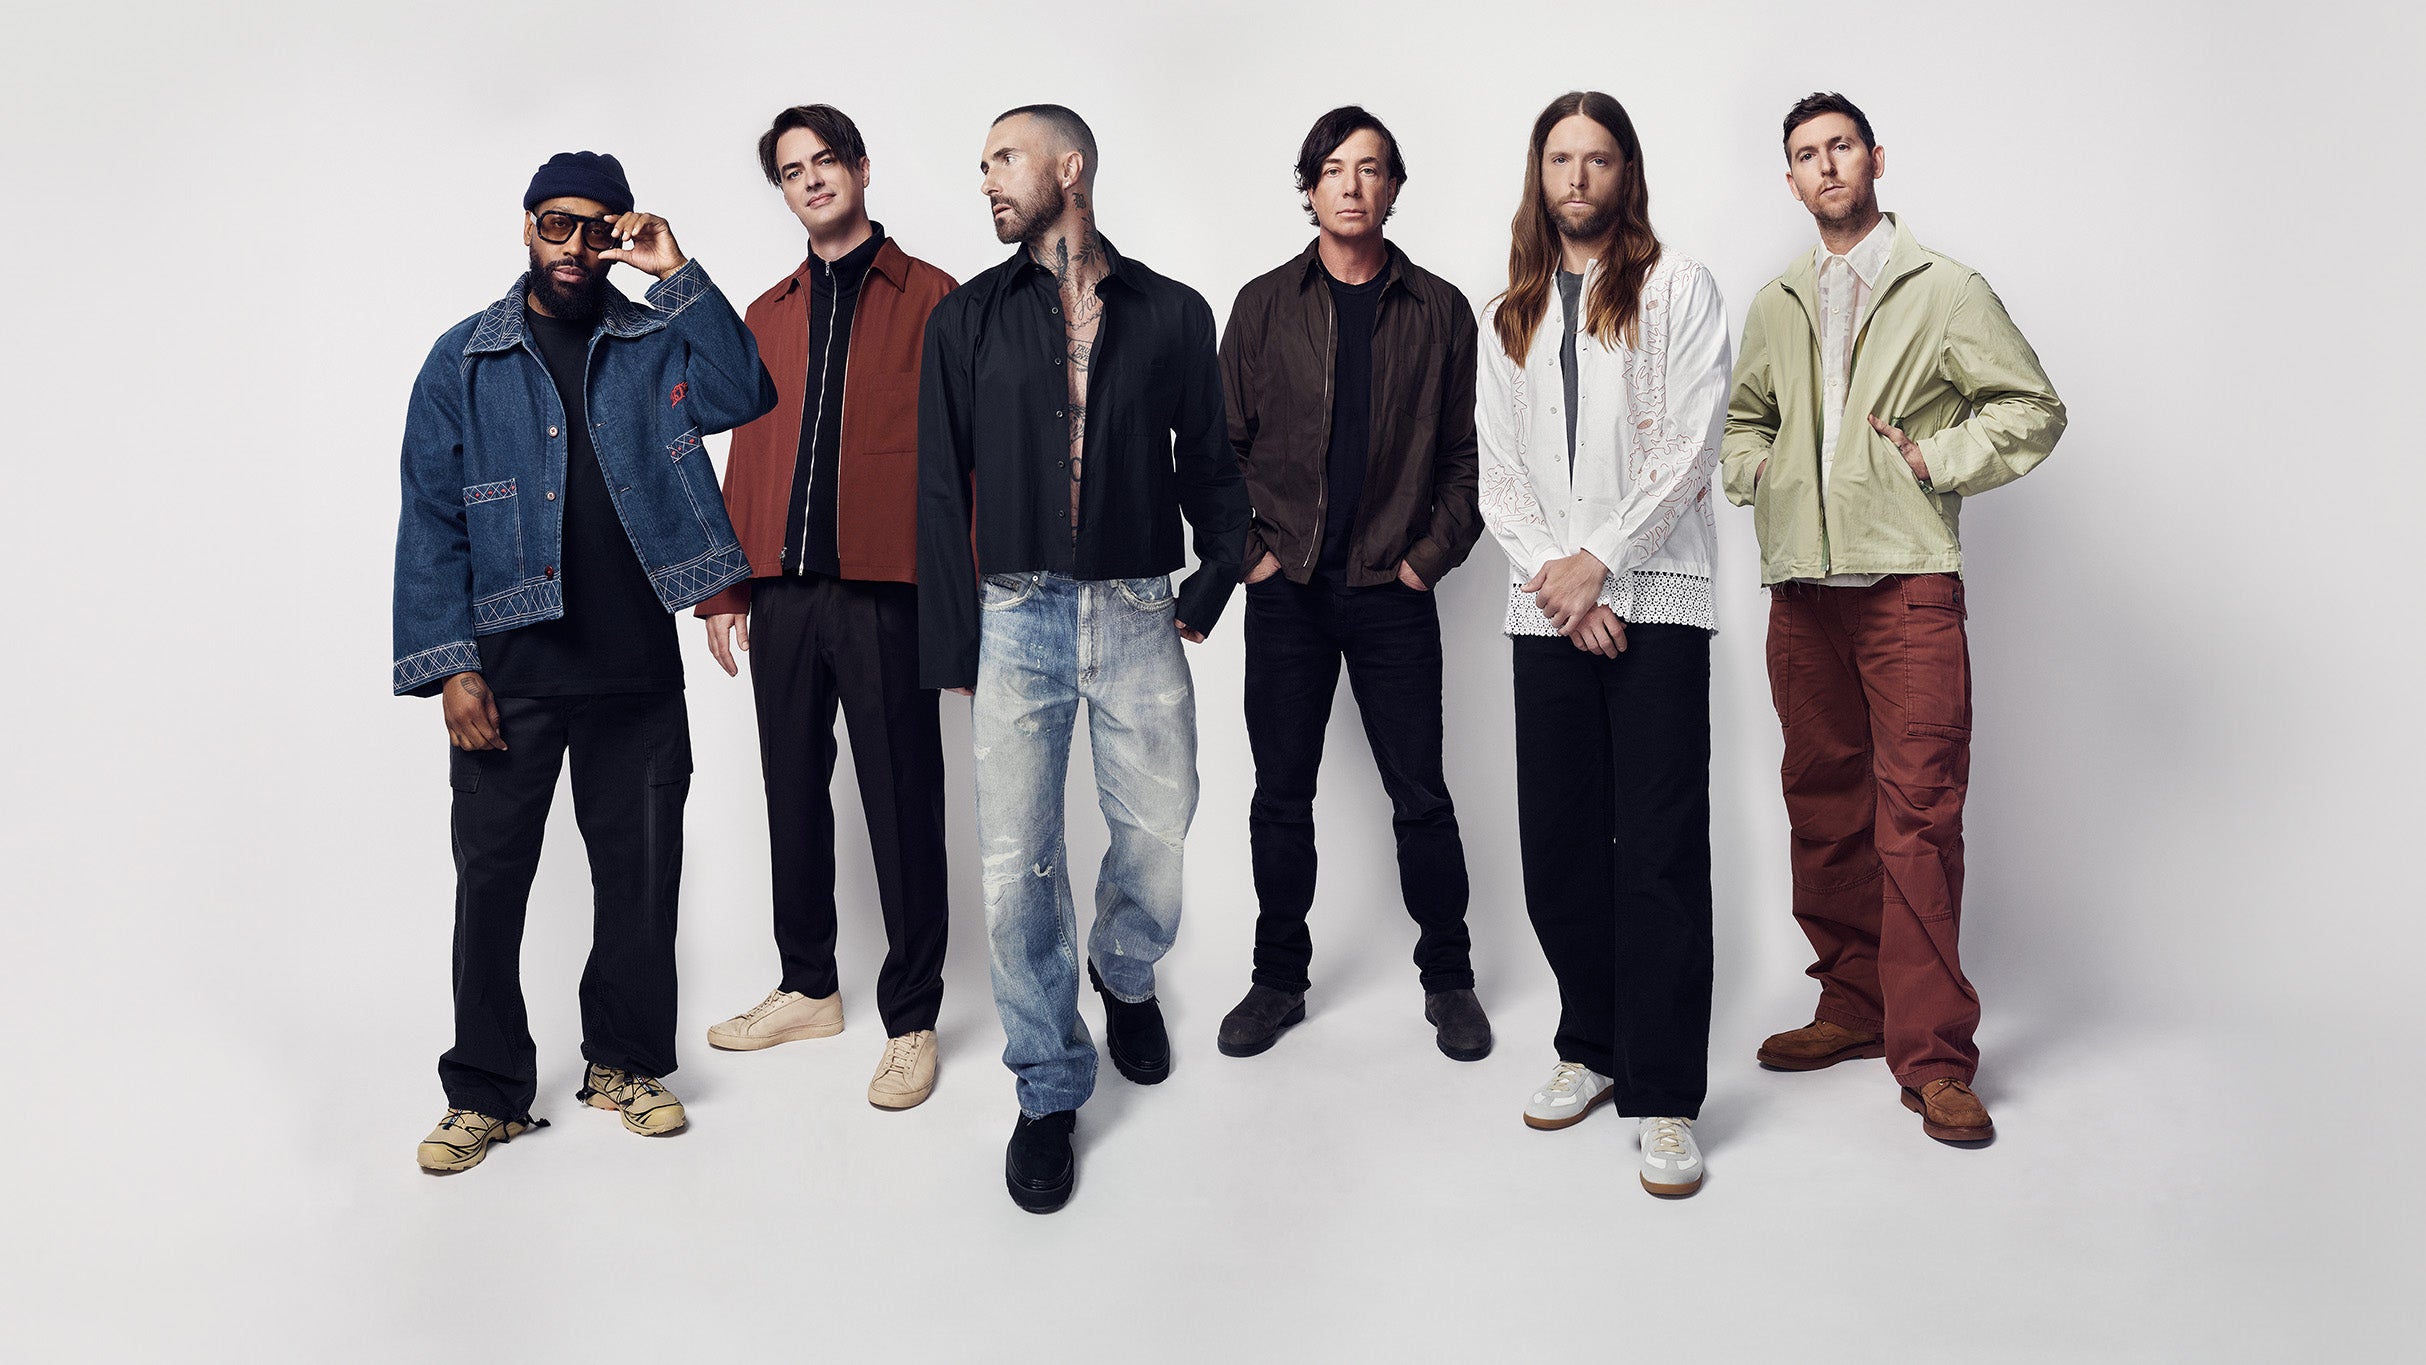 exclusive presale password for Maroon 5 Live In Concert tickets in Charlotte